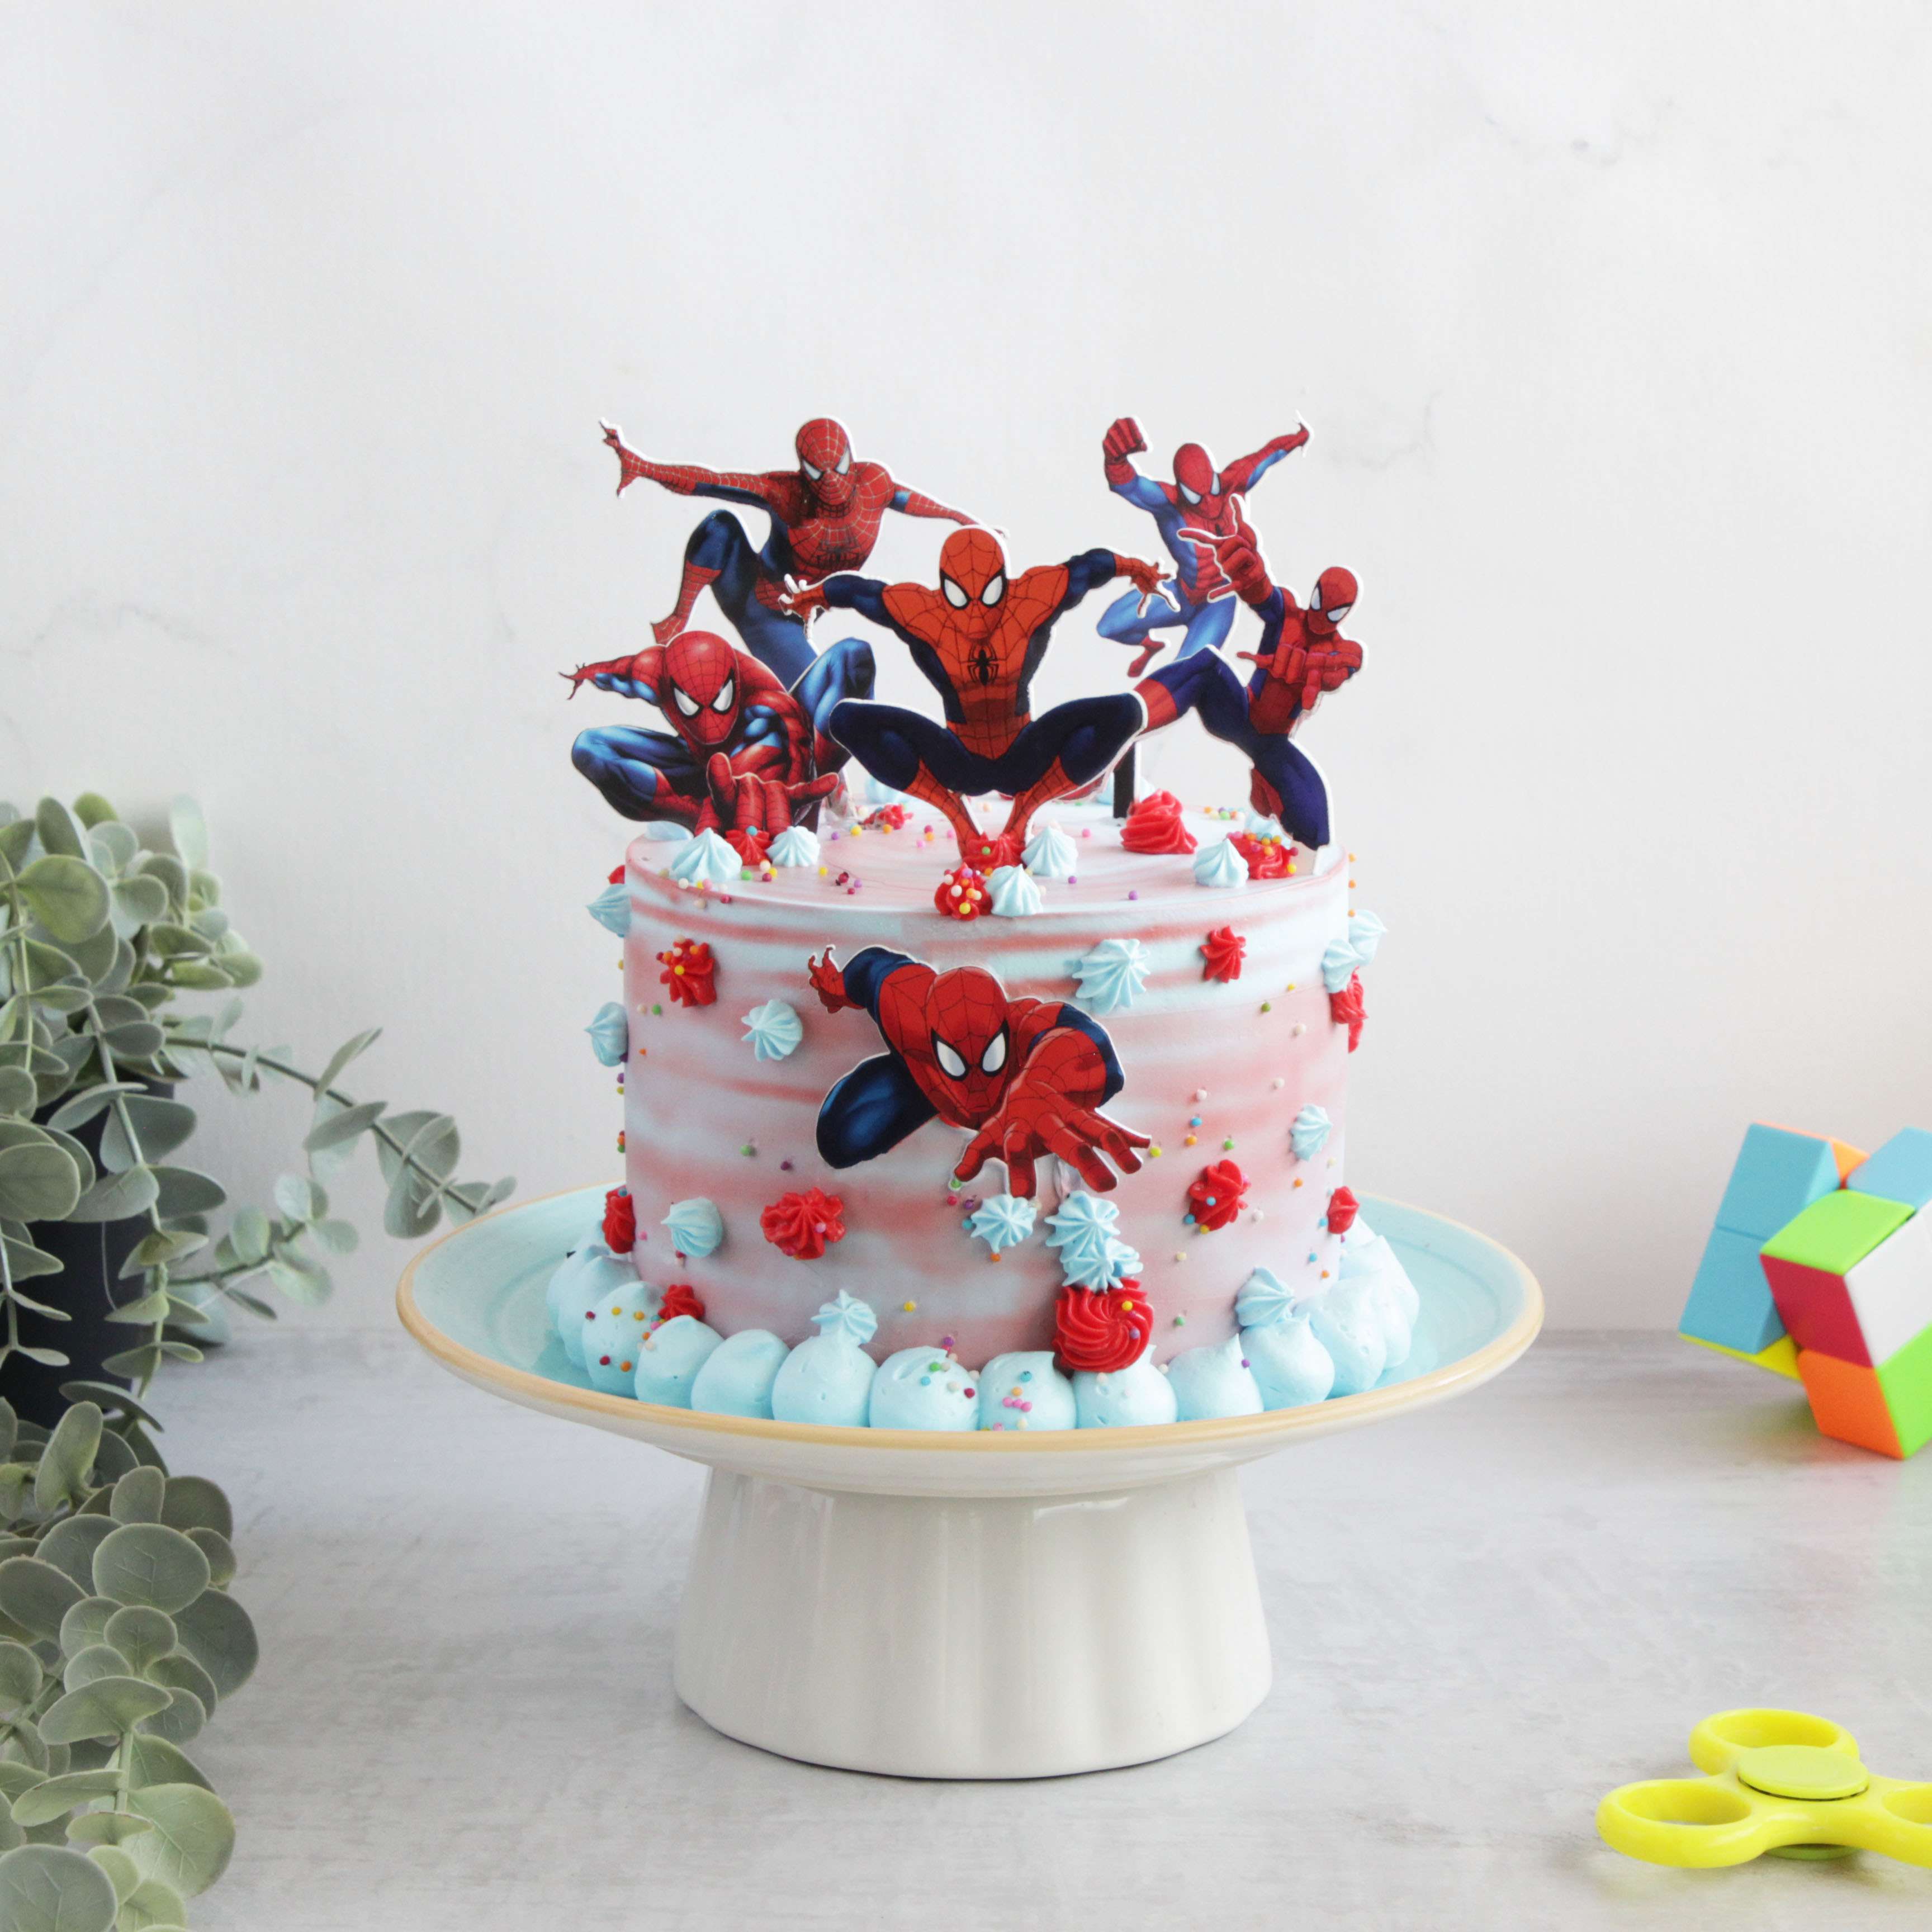 Simple spiderman cake - Hayley Cakes and Cookies Hayley Cakes and Cookies